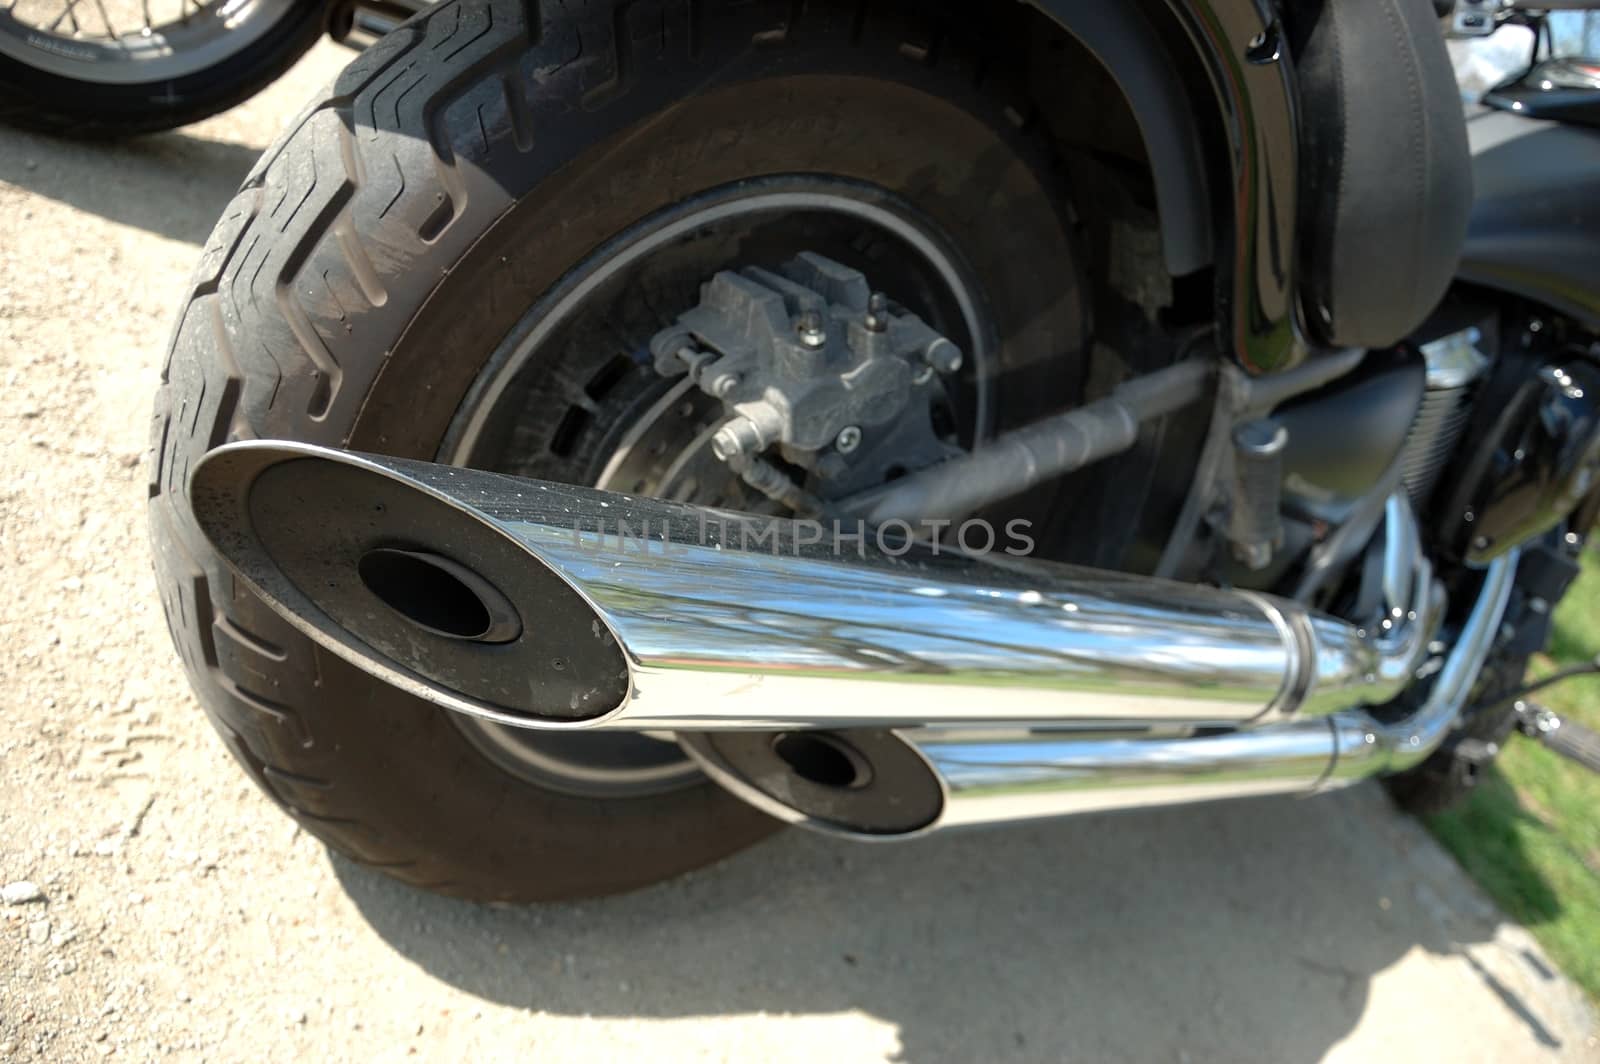 Motorcycle exhaust pipes by bartekchiny